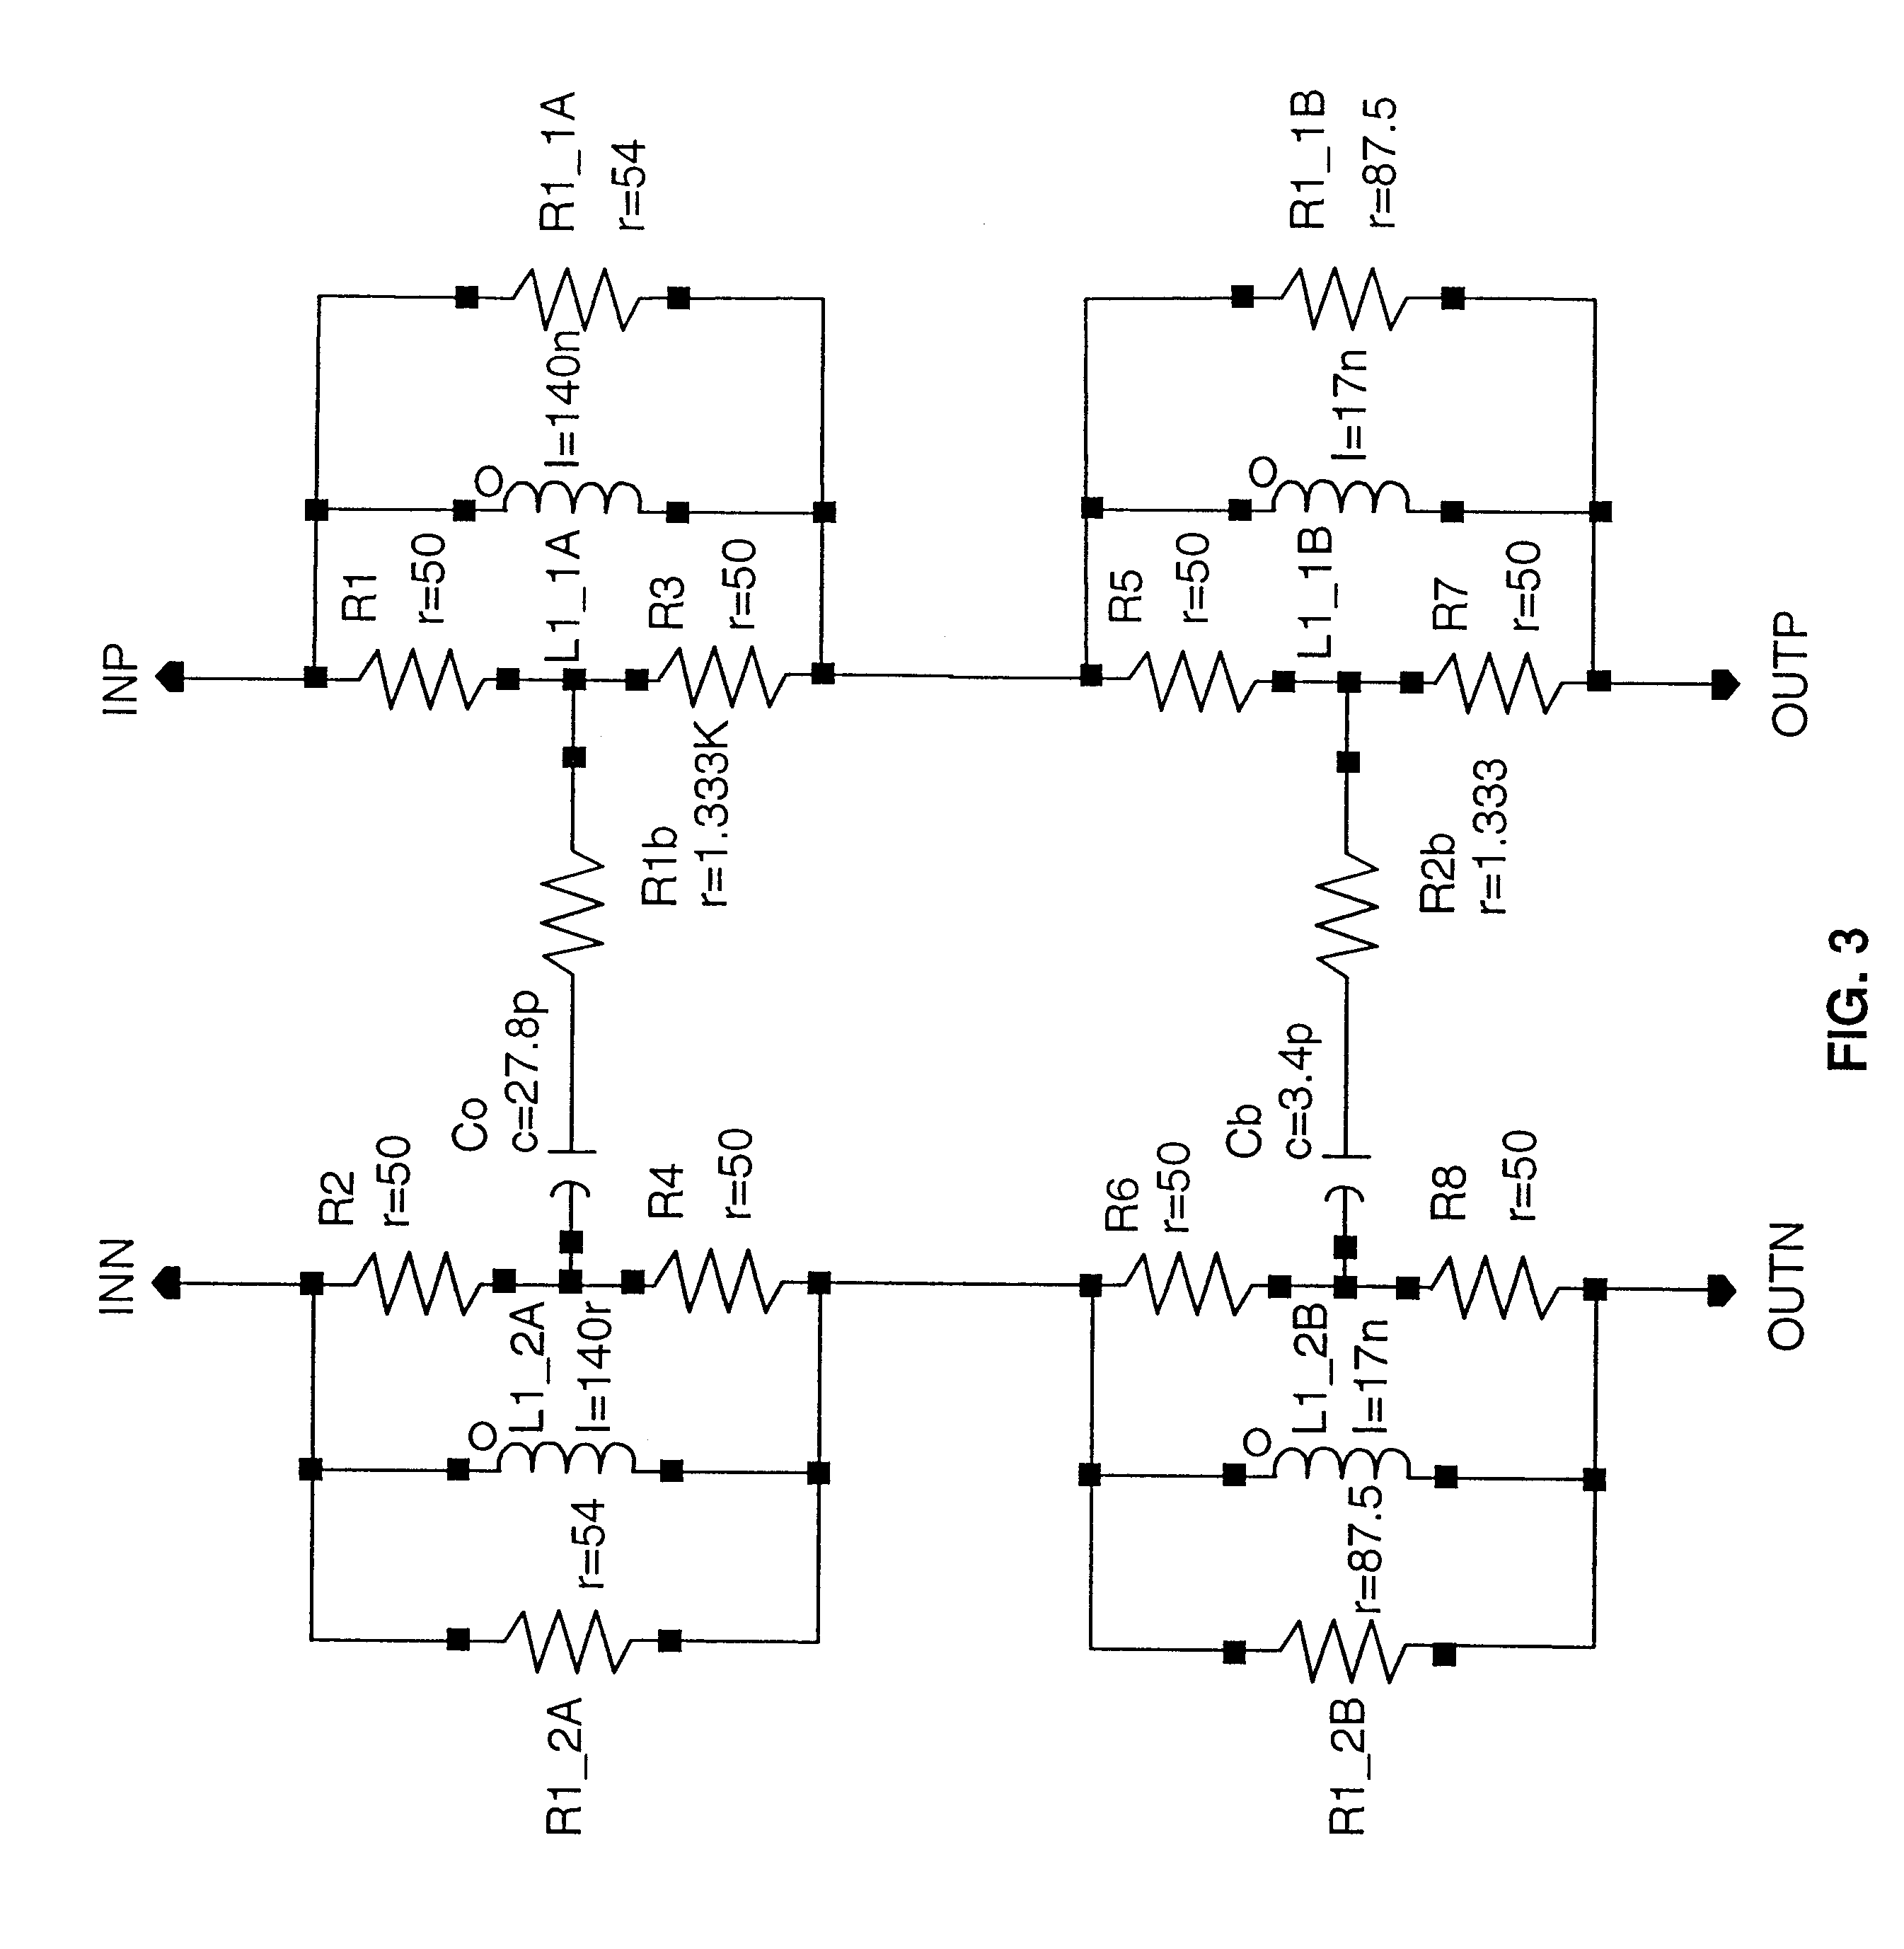 Adaptive interface apparatus and method for data terminal elements in a communication network transmitting and receiving ethernet over a shielded twisted pair cabling system